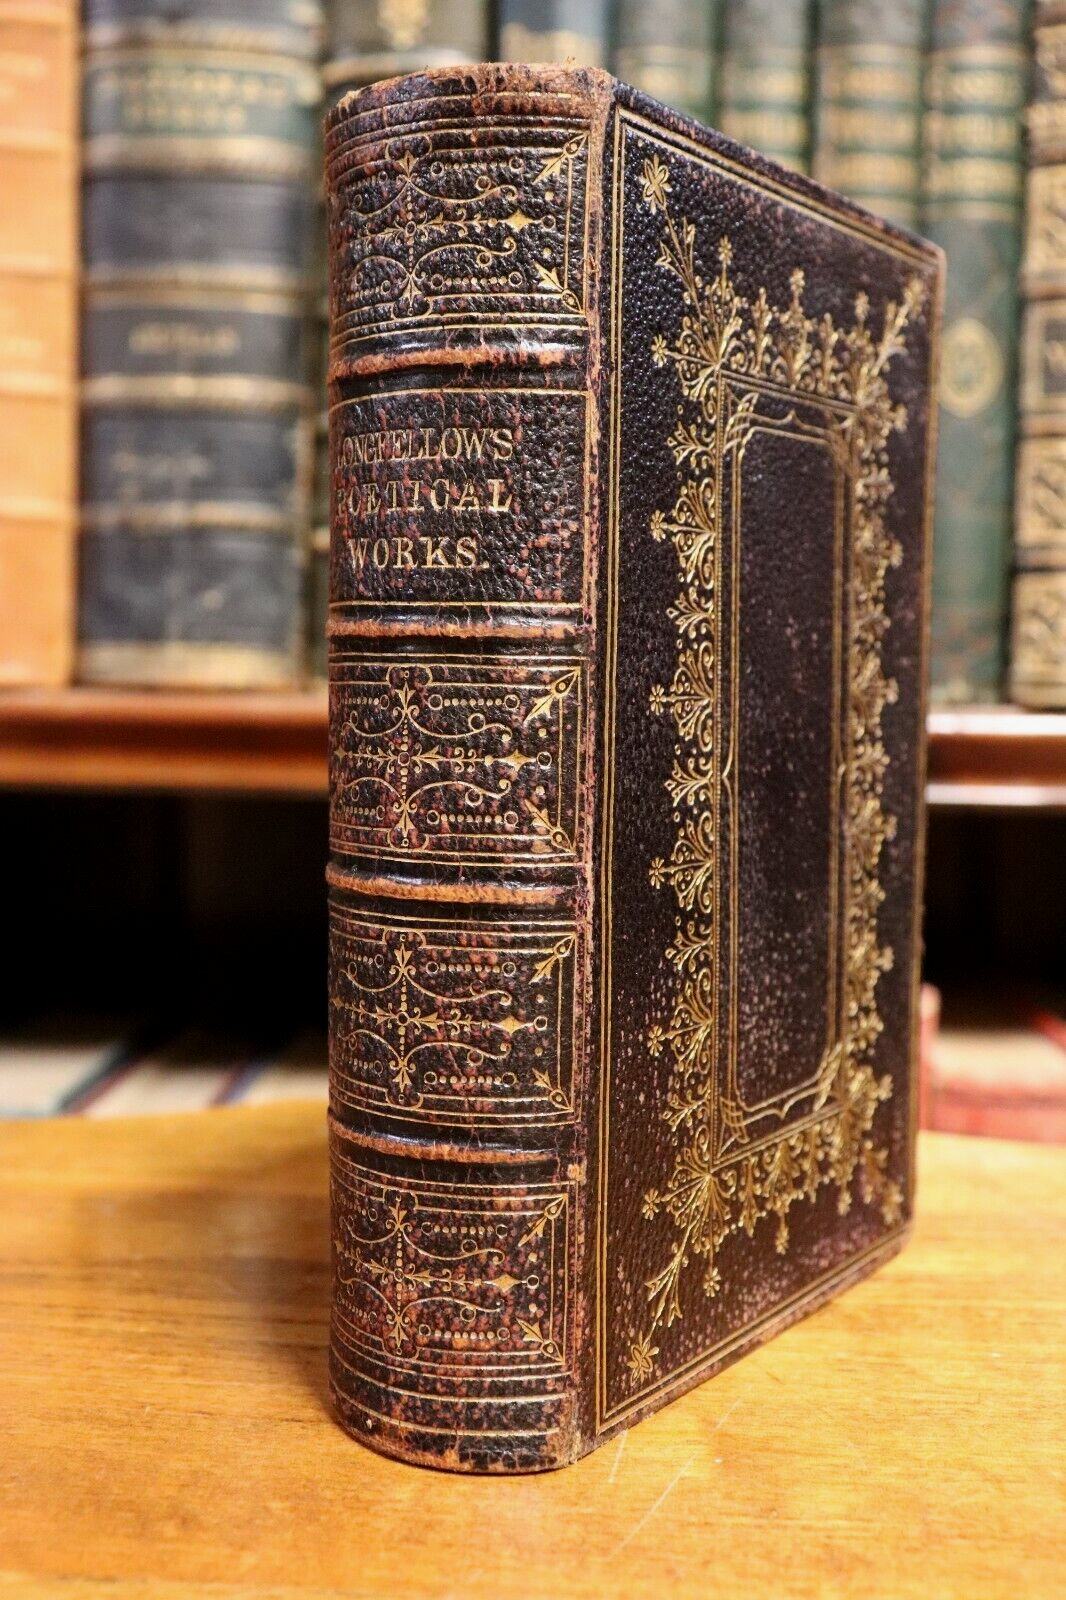 The Poetical Works Of Longfellow w/Hiawatha - 1856 - Antique Poetry Book